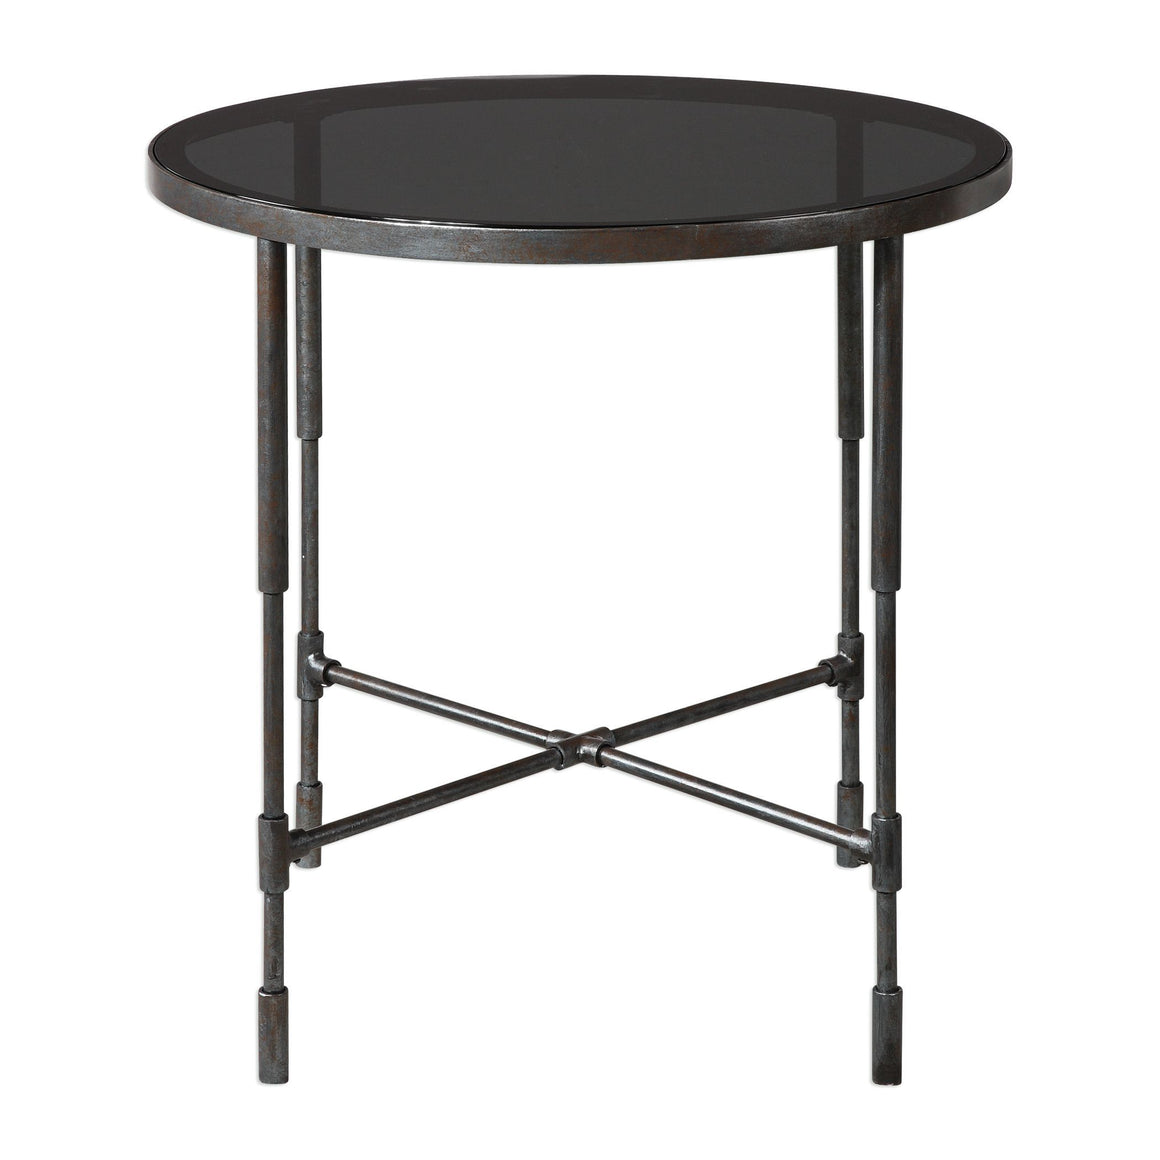 Vande Aged Steel Accent Table - taylor ray decor